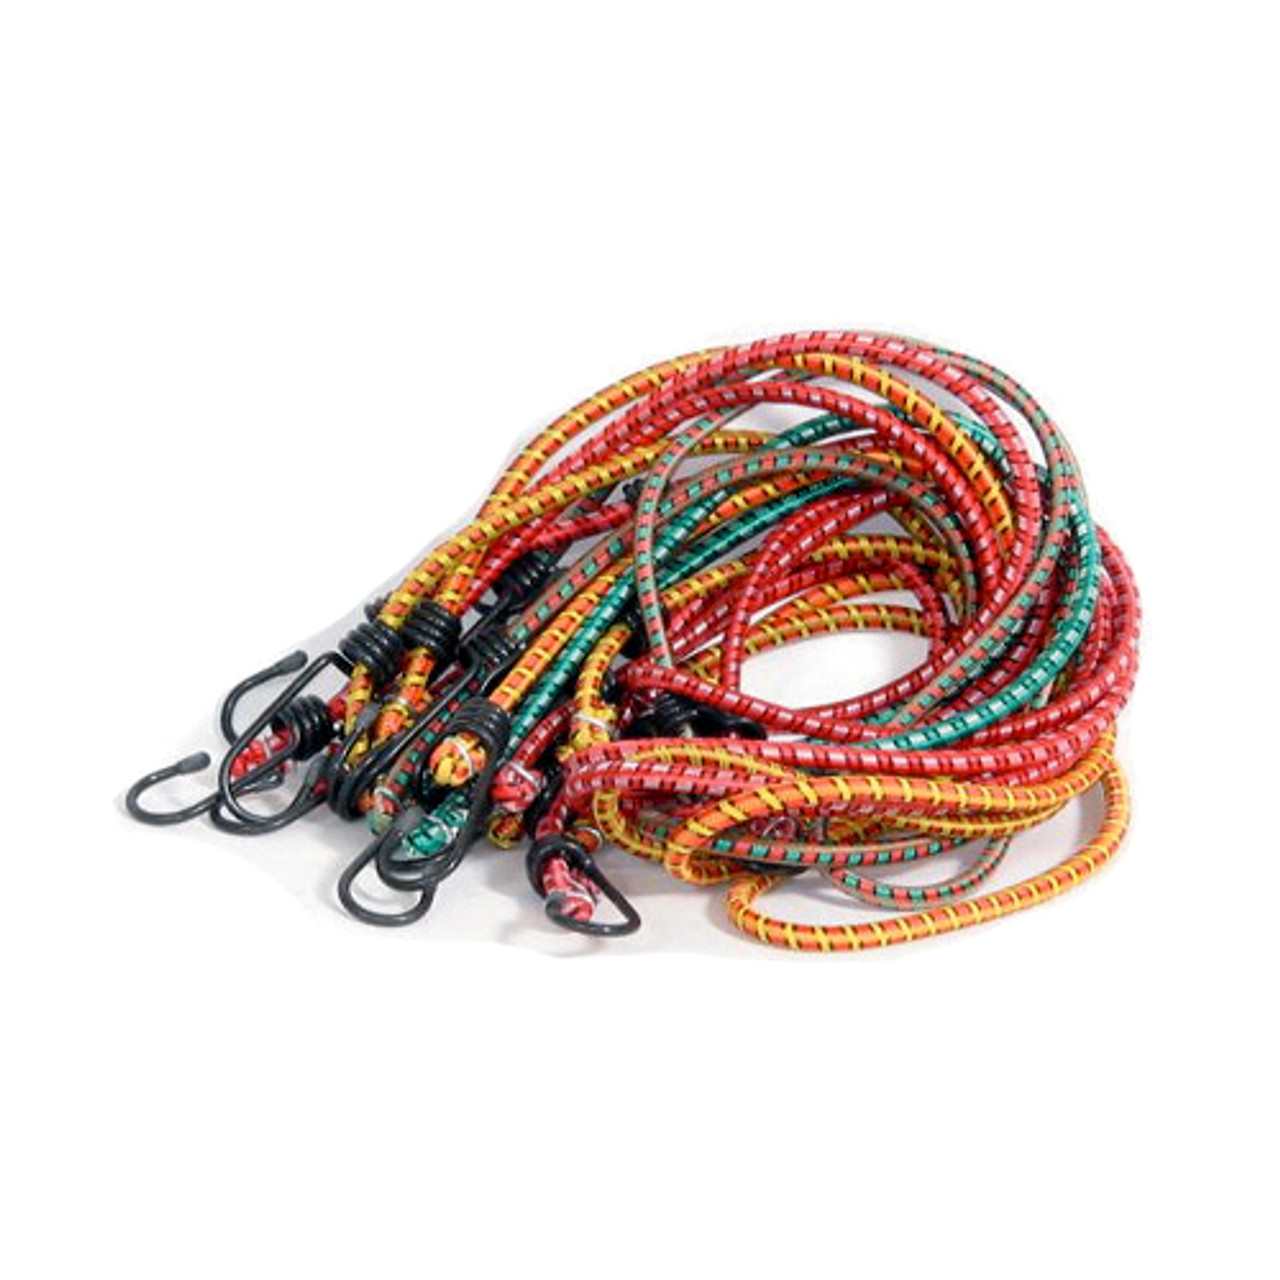 48" Multi Colored Bungee Tie Downs